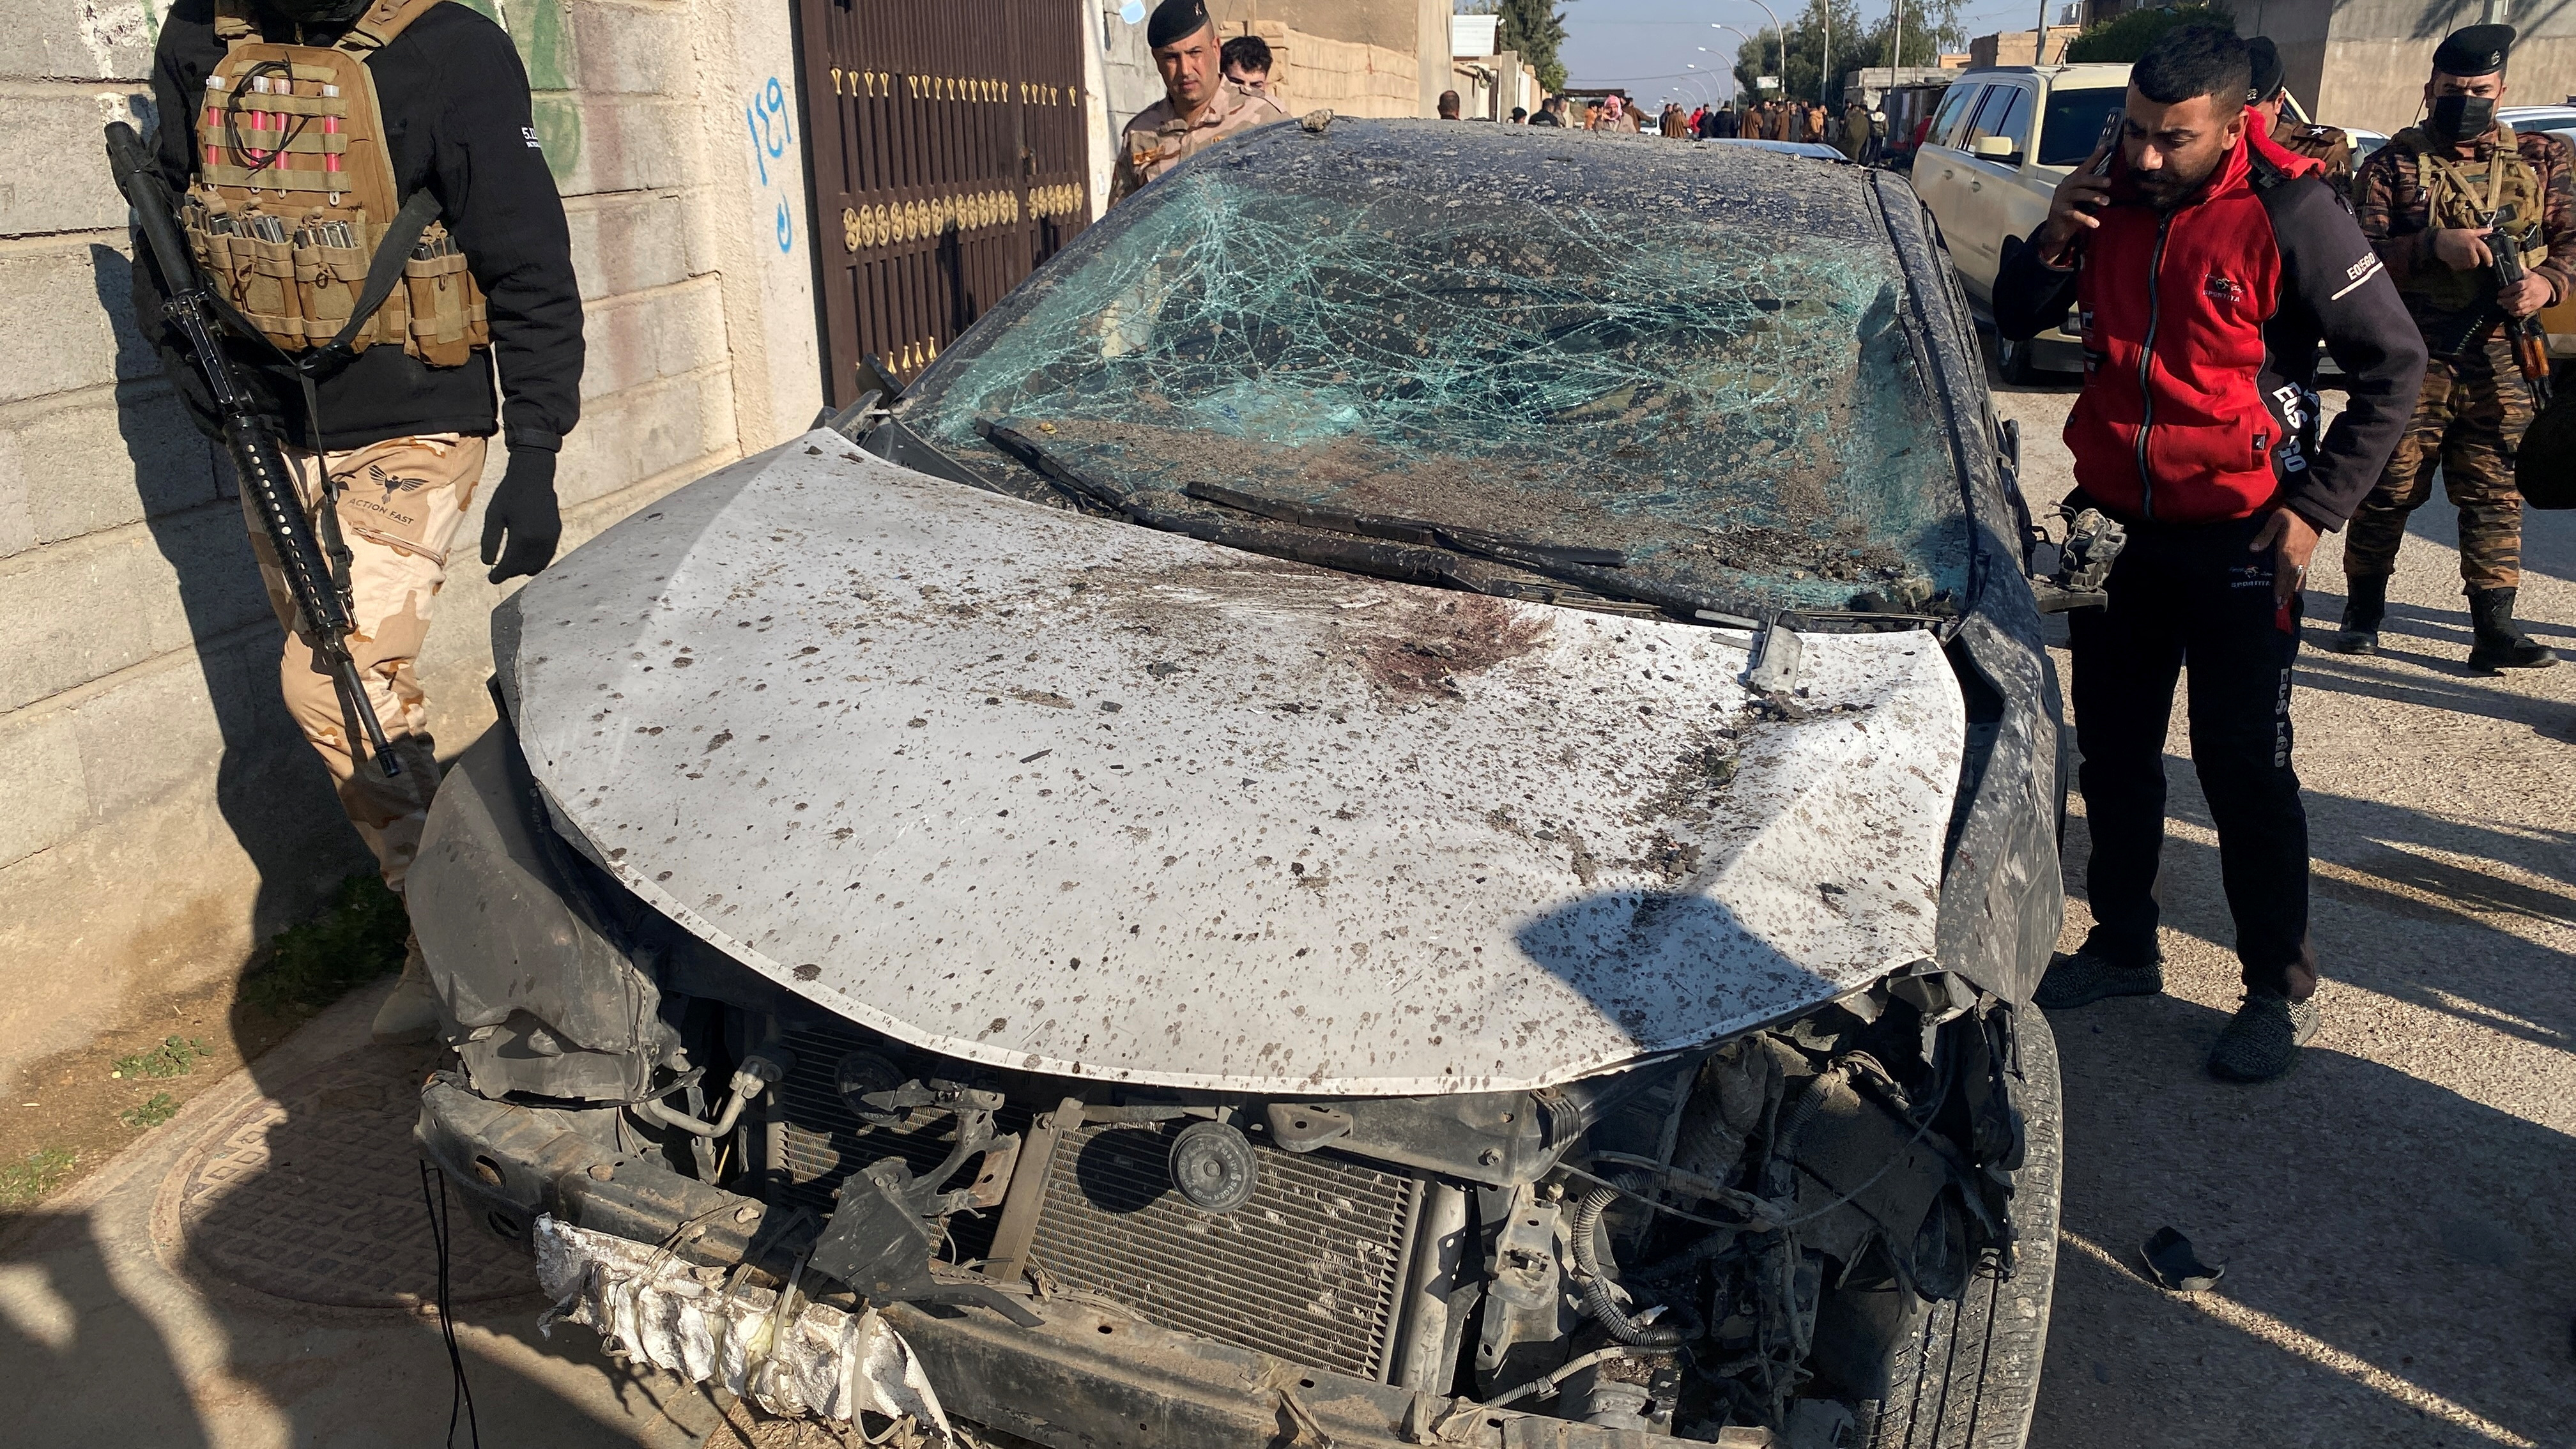 A damaged car is pictured at the site of a U.S. airstrike in al-Qaim